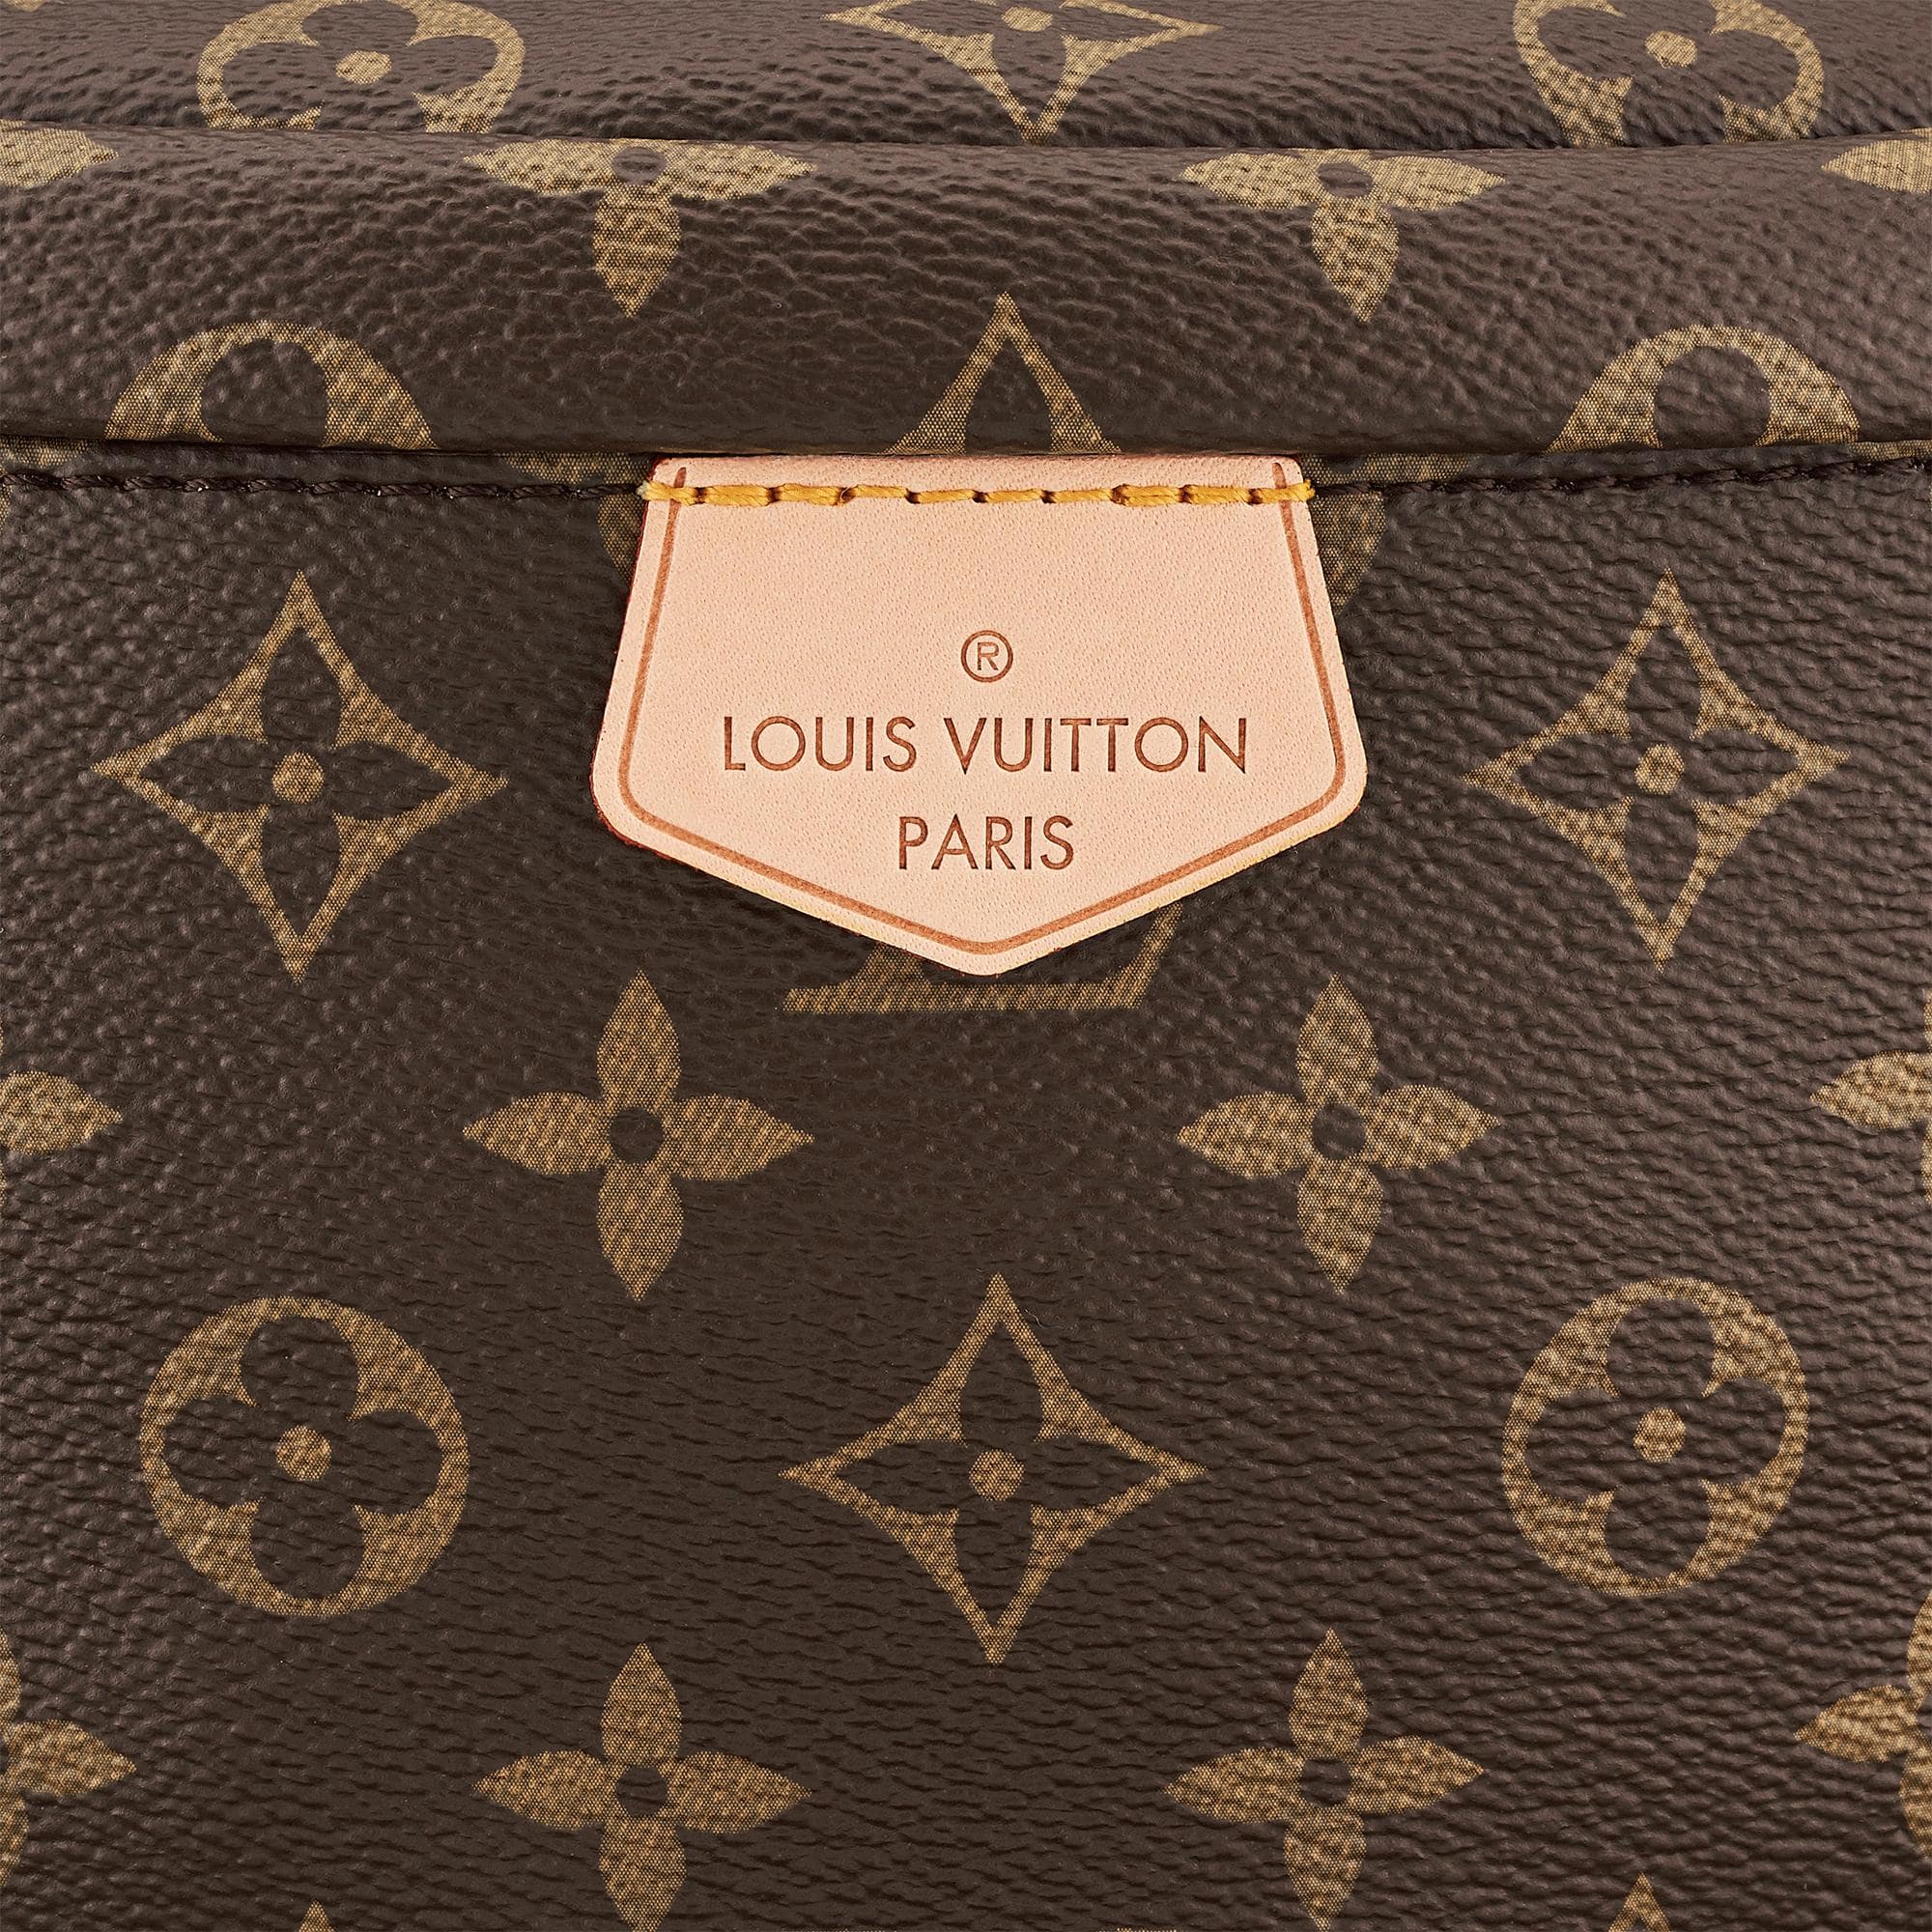 The story behind the brand: Louis Vuitton